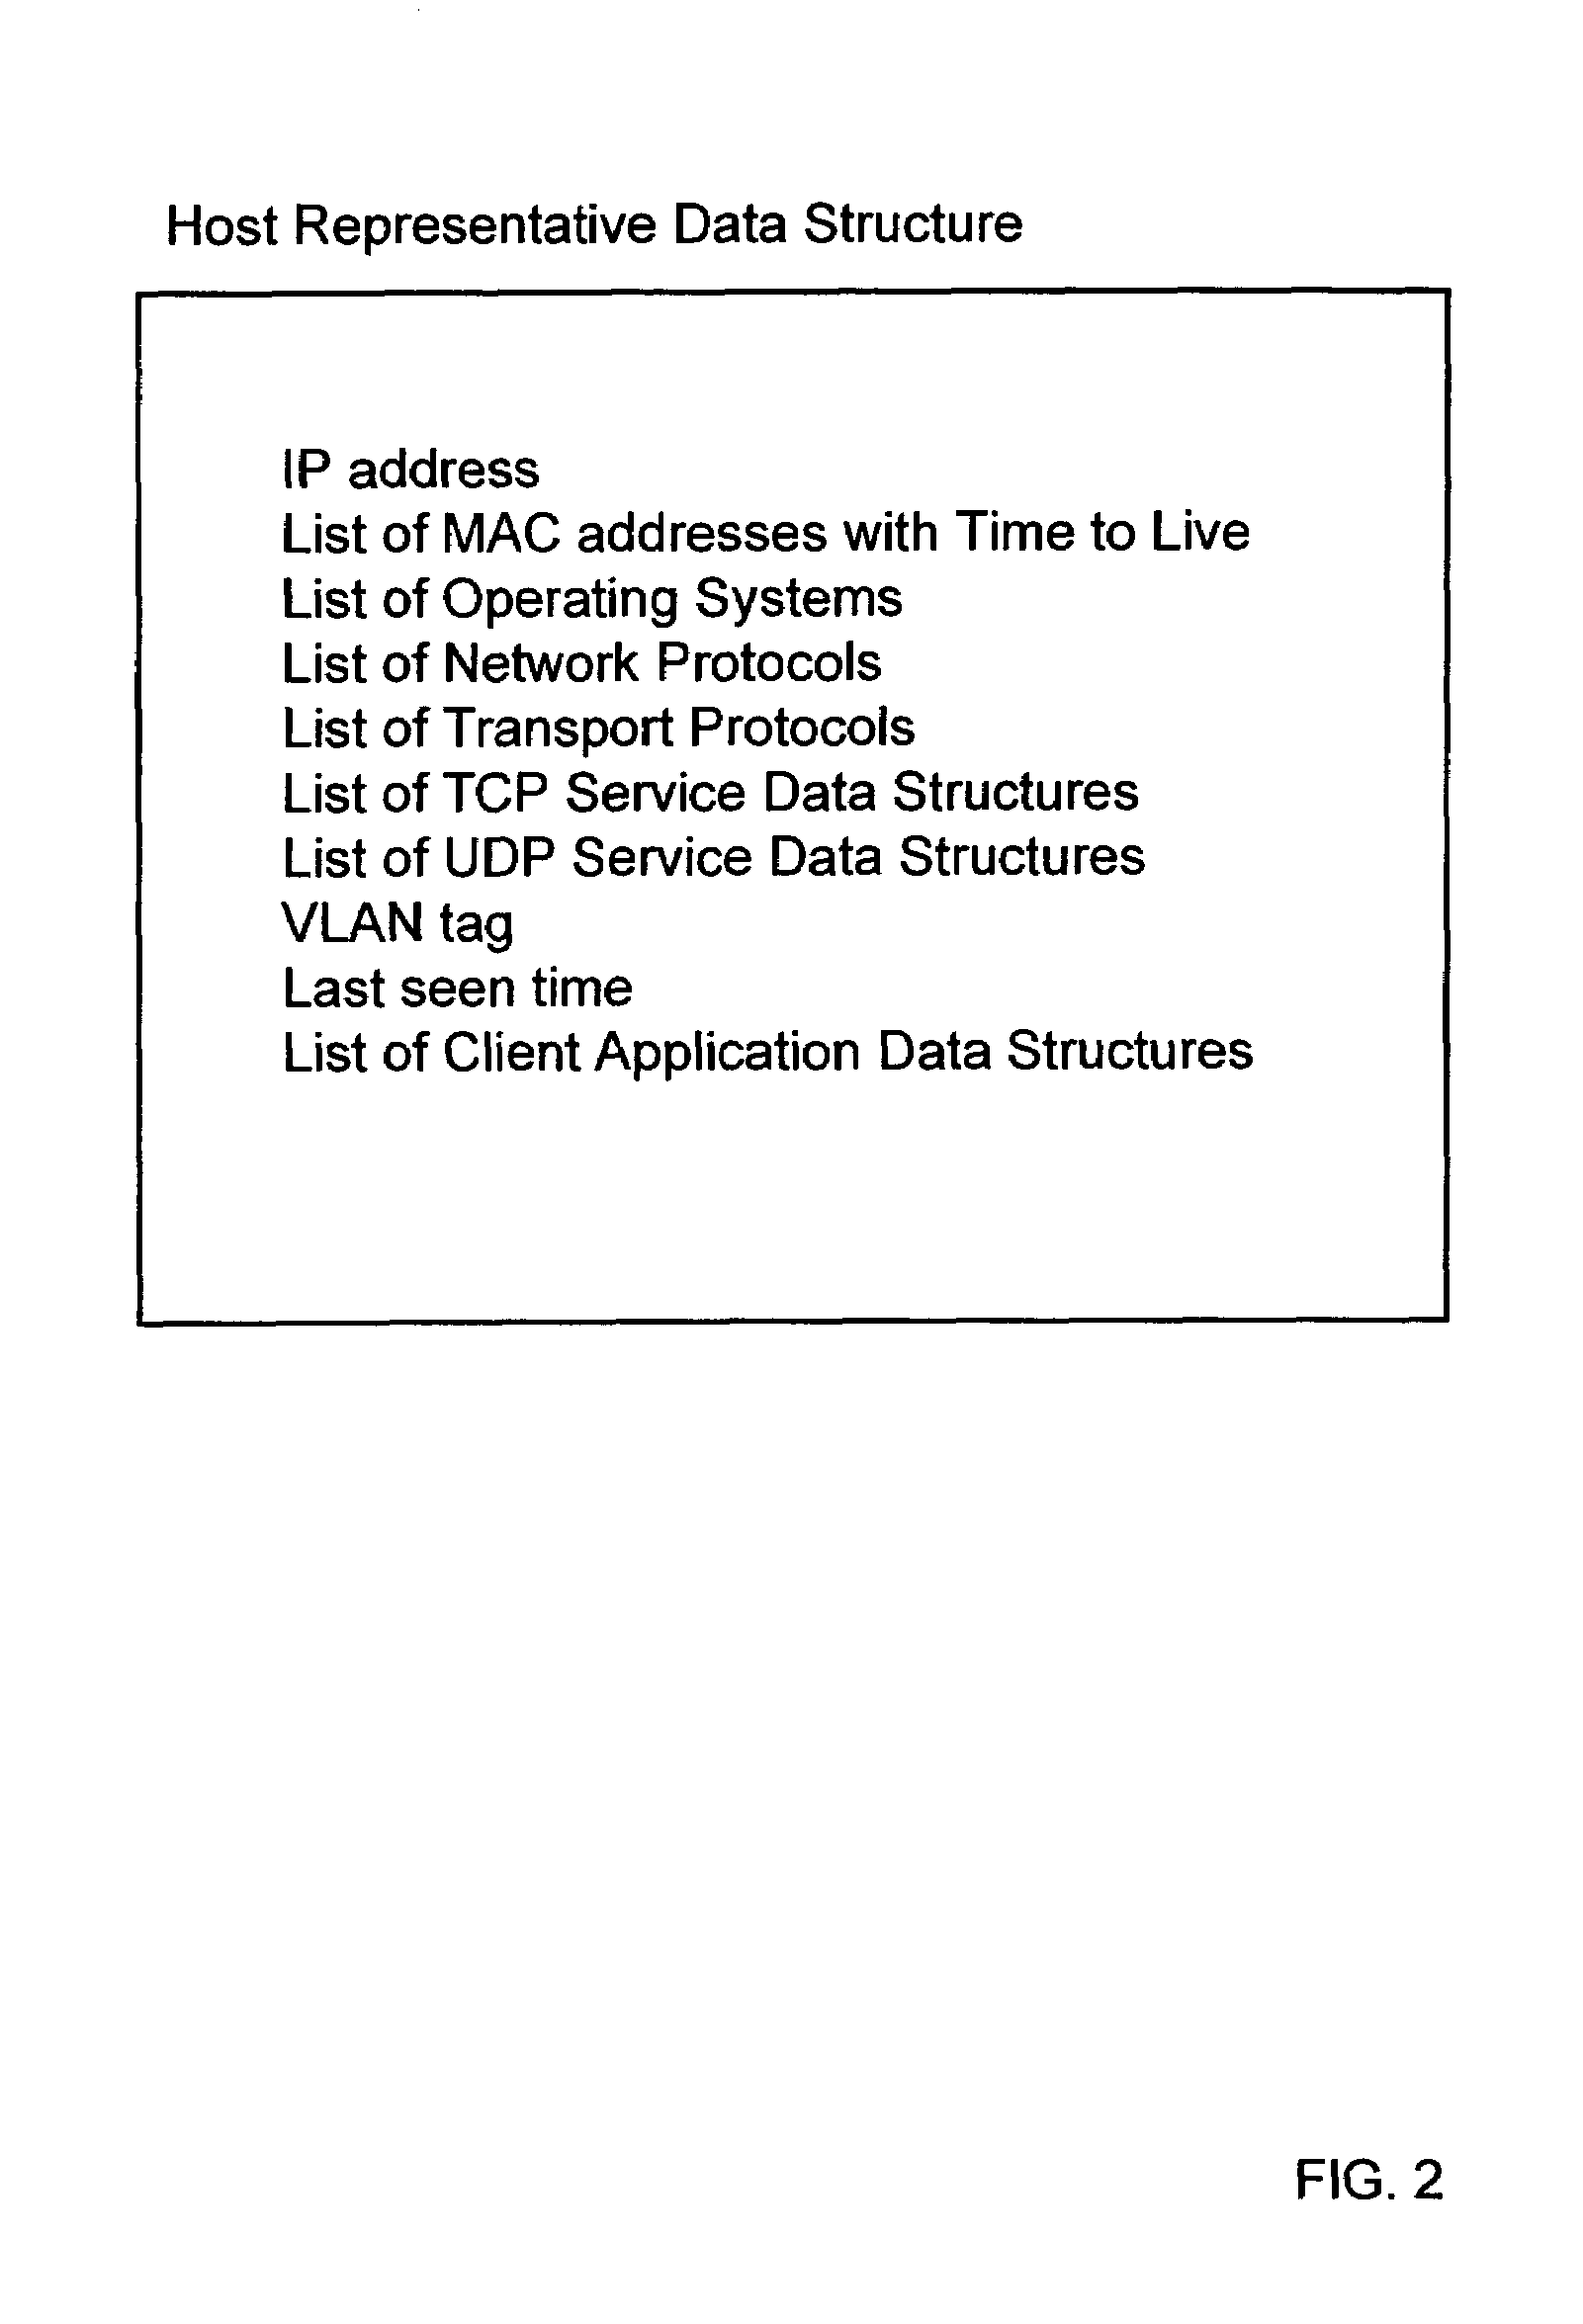 Systems and methods for identifying the client applications of a network